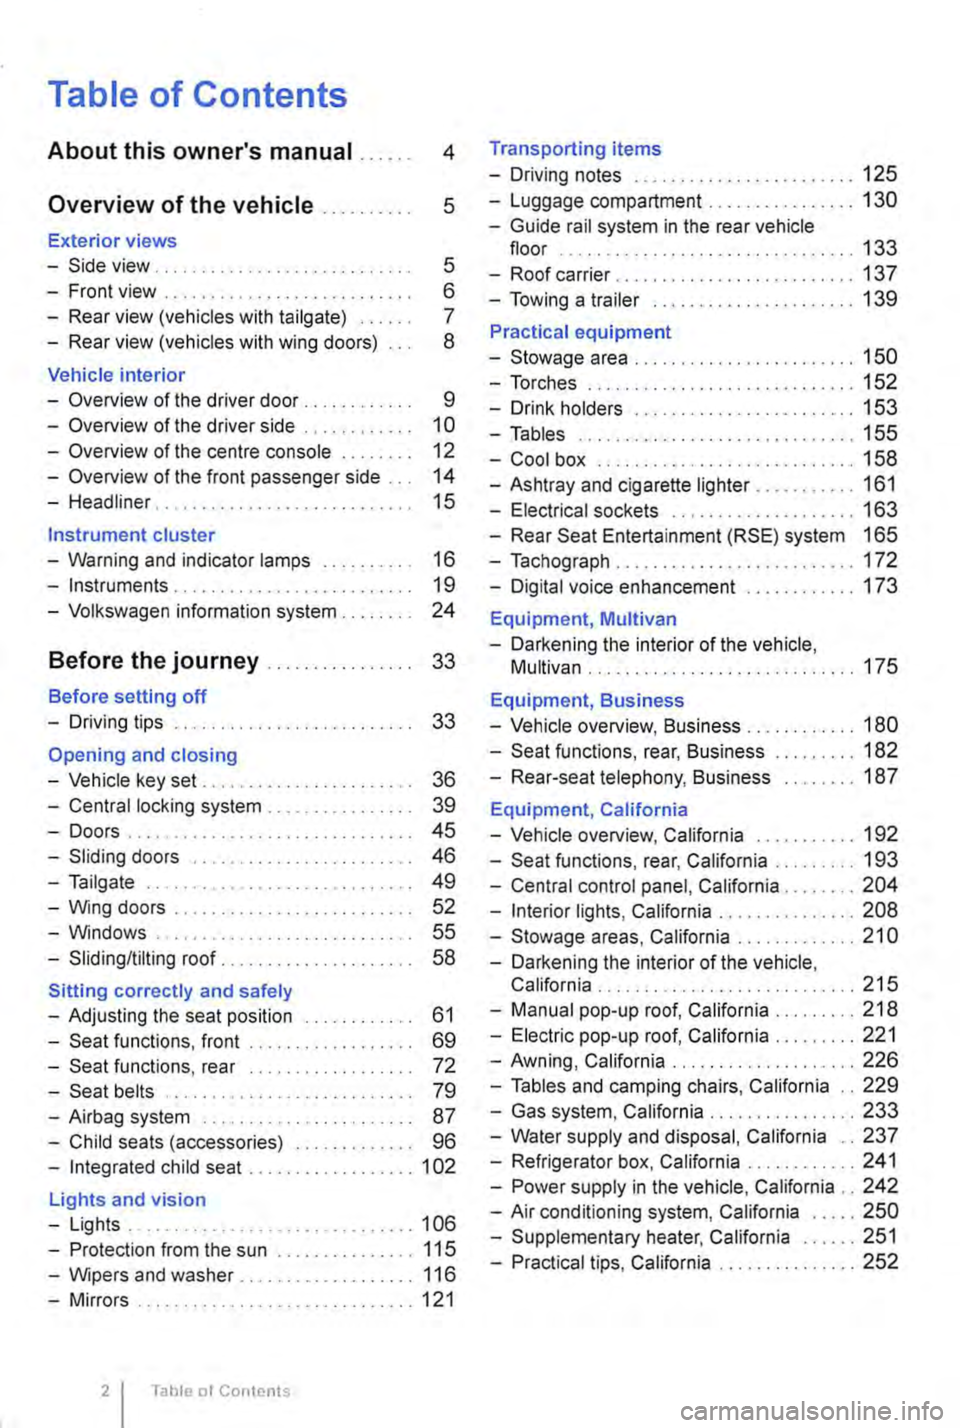 VOLKSWAGEN TRANSPORTER 2011  Owners Manual Table of Contents 
About this owners manual . . . . . . 4 
Overview of the vehicle . . . . . . . . . . 5 
Exterior views 
-Side view . . . . . . . . . . . . . . . . . . . . . . . . . . . . 5 
-Front 